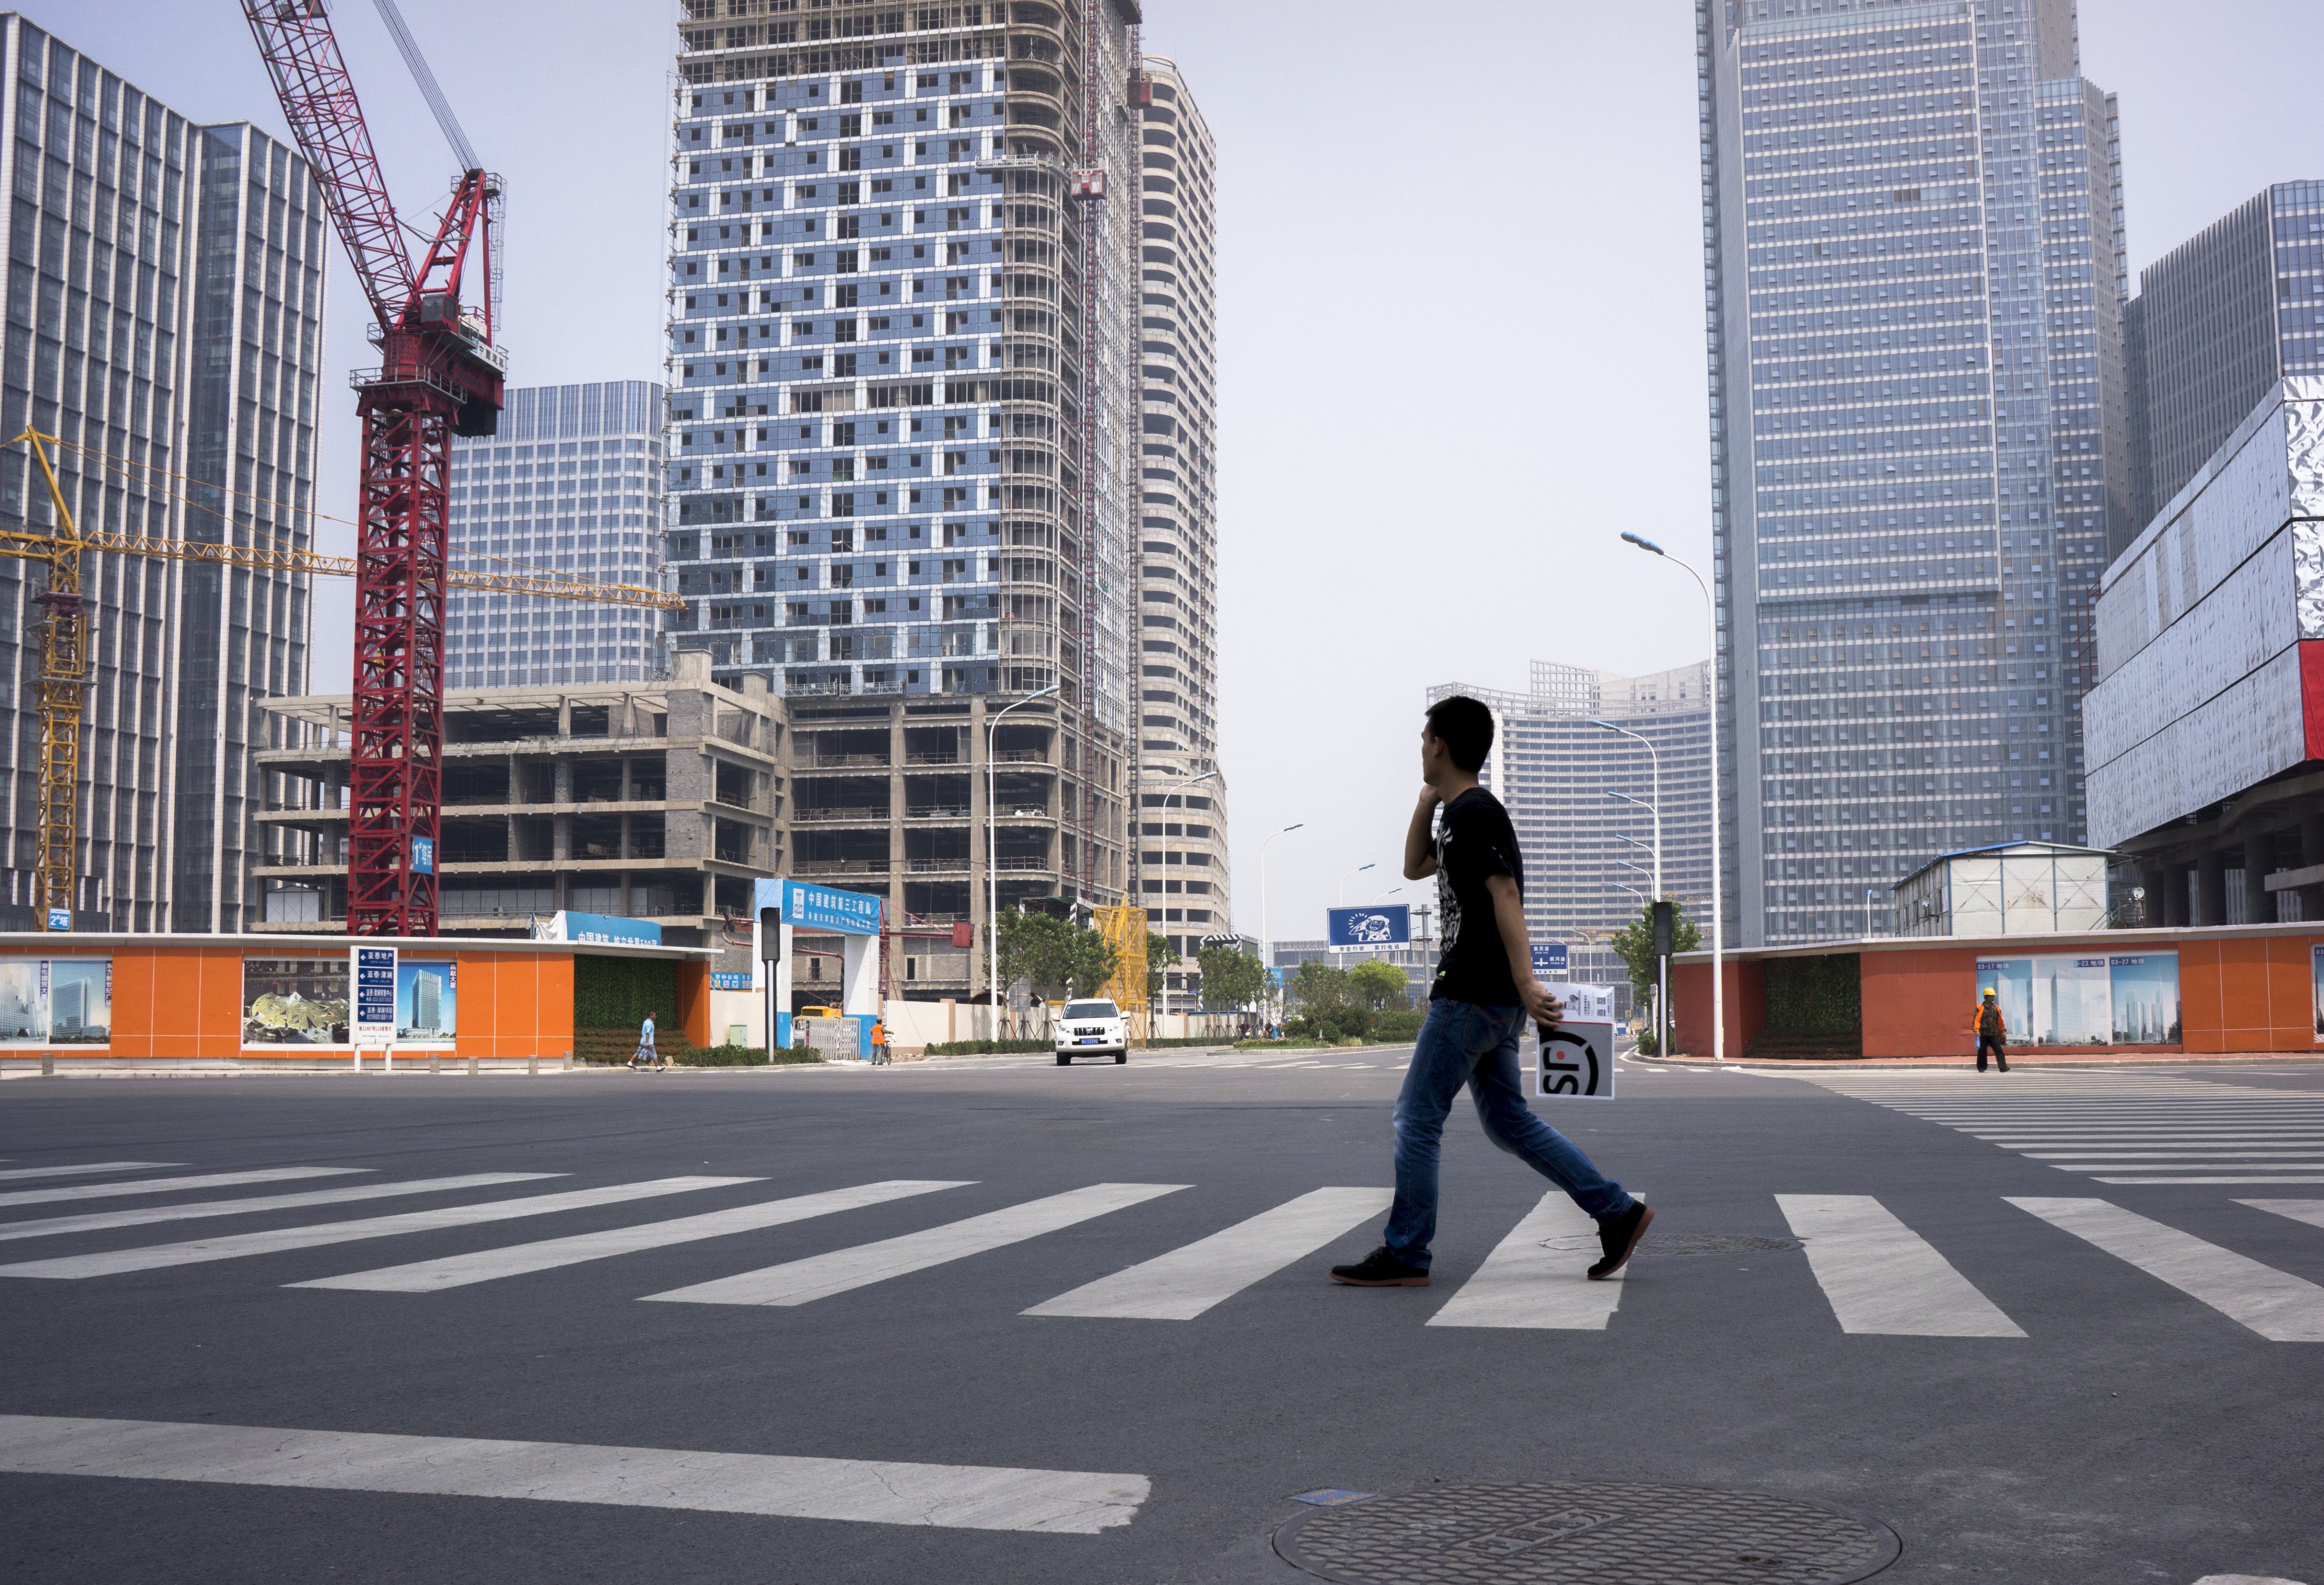 Construction sites and vacant streets in Tianjin, China. The new central business district, under construction in Tianjin, was touted as another Manhattan, but is now a ghost city. The nation's slowing economy is putting the project into jeopardy (Zhang Peng—LightRocket/Getty Images)